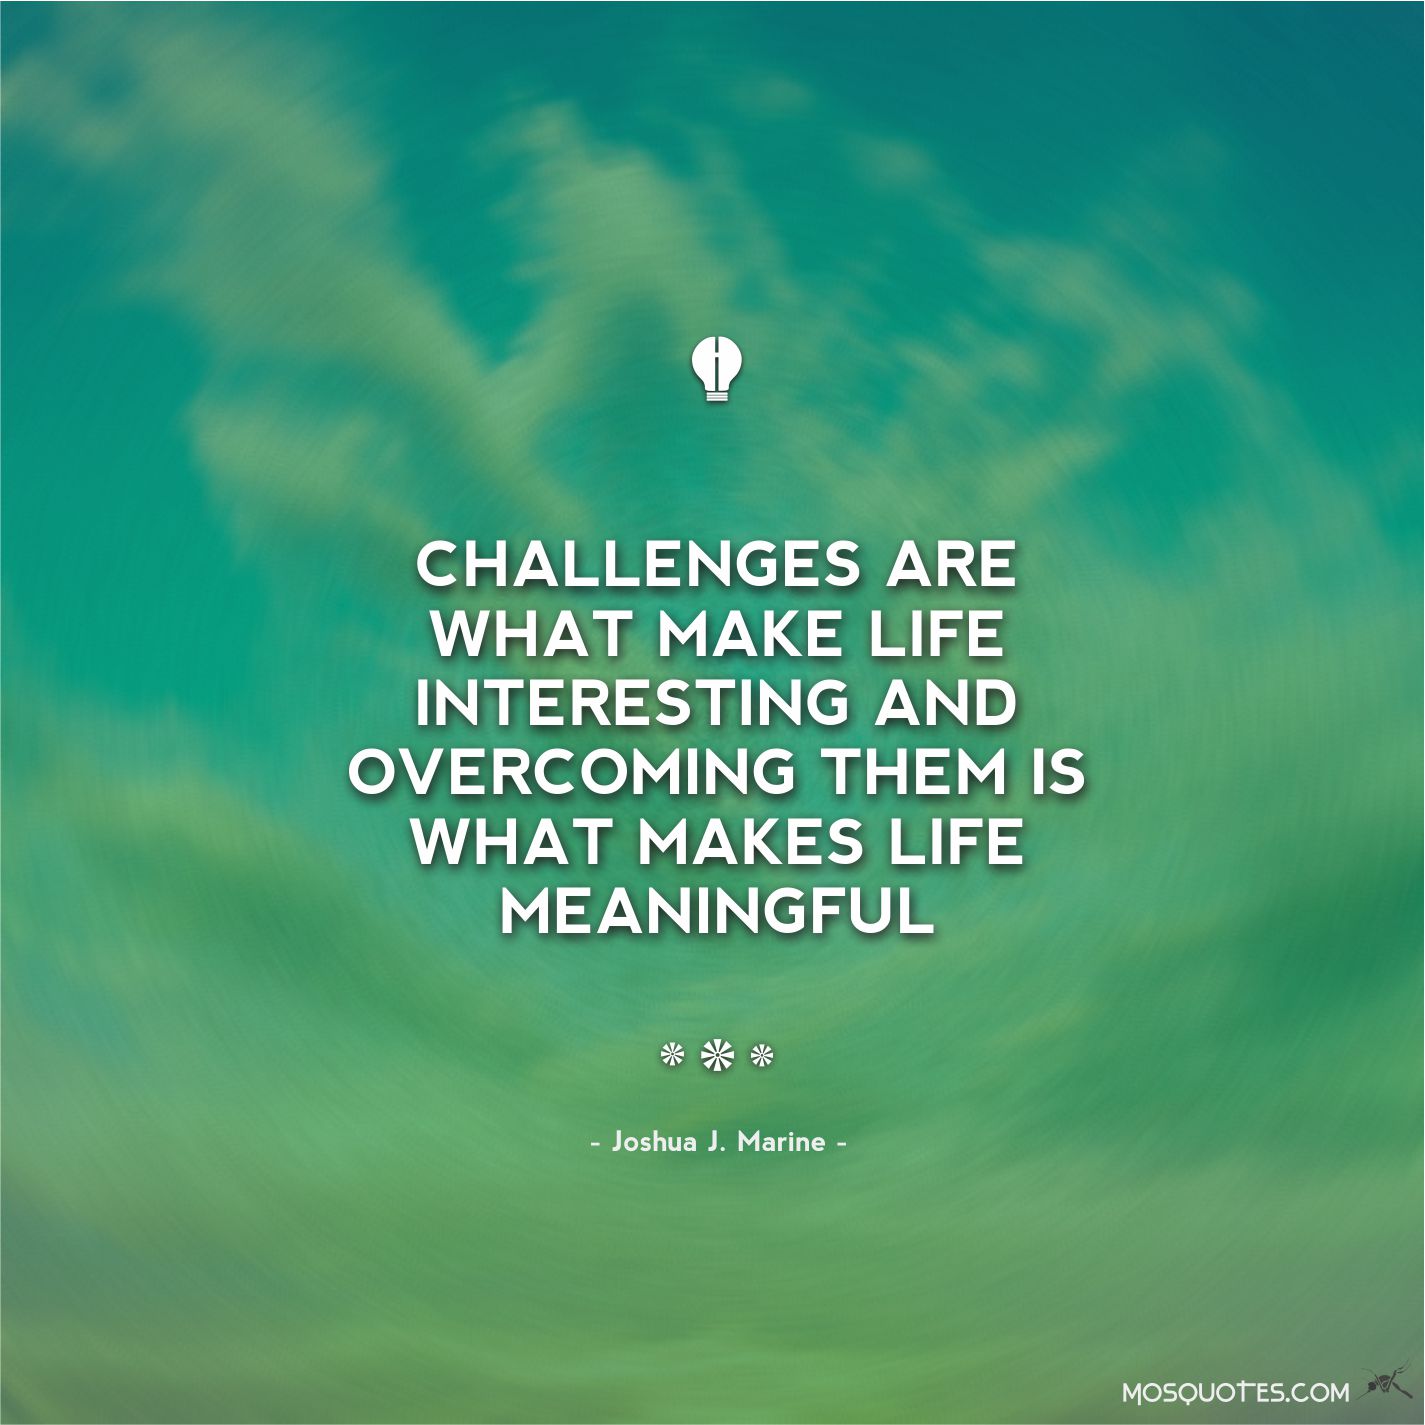 Inspirational Quotes About Overcoming Challenges. QuotesGram